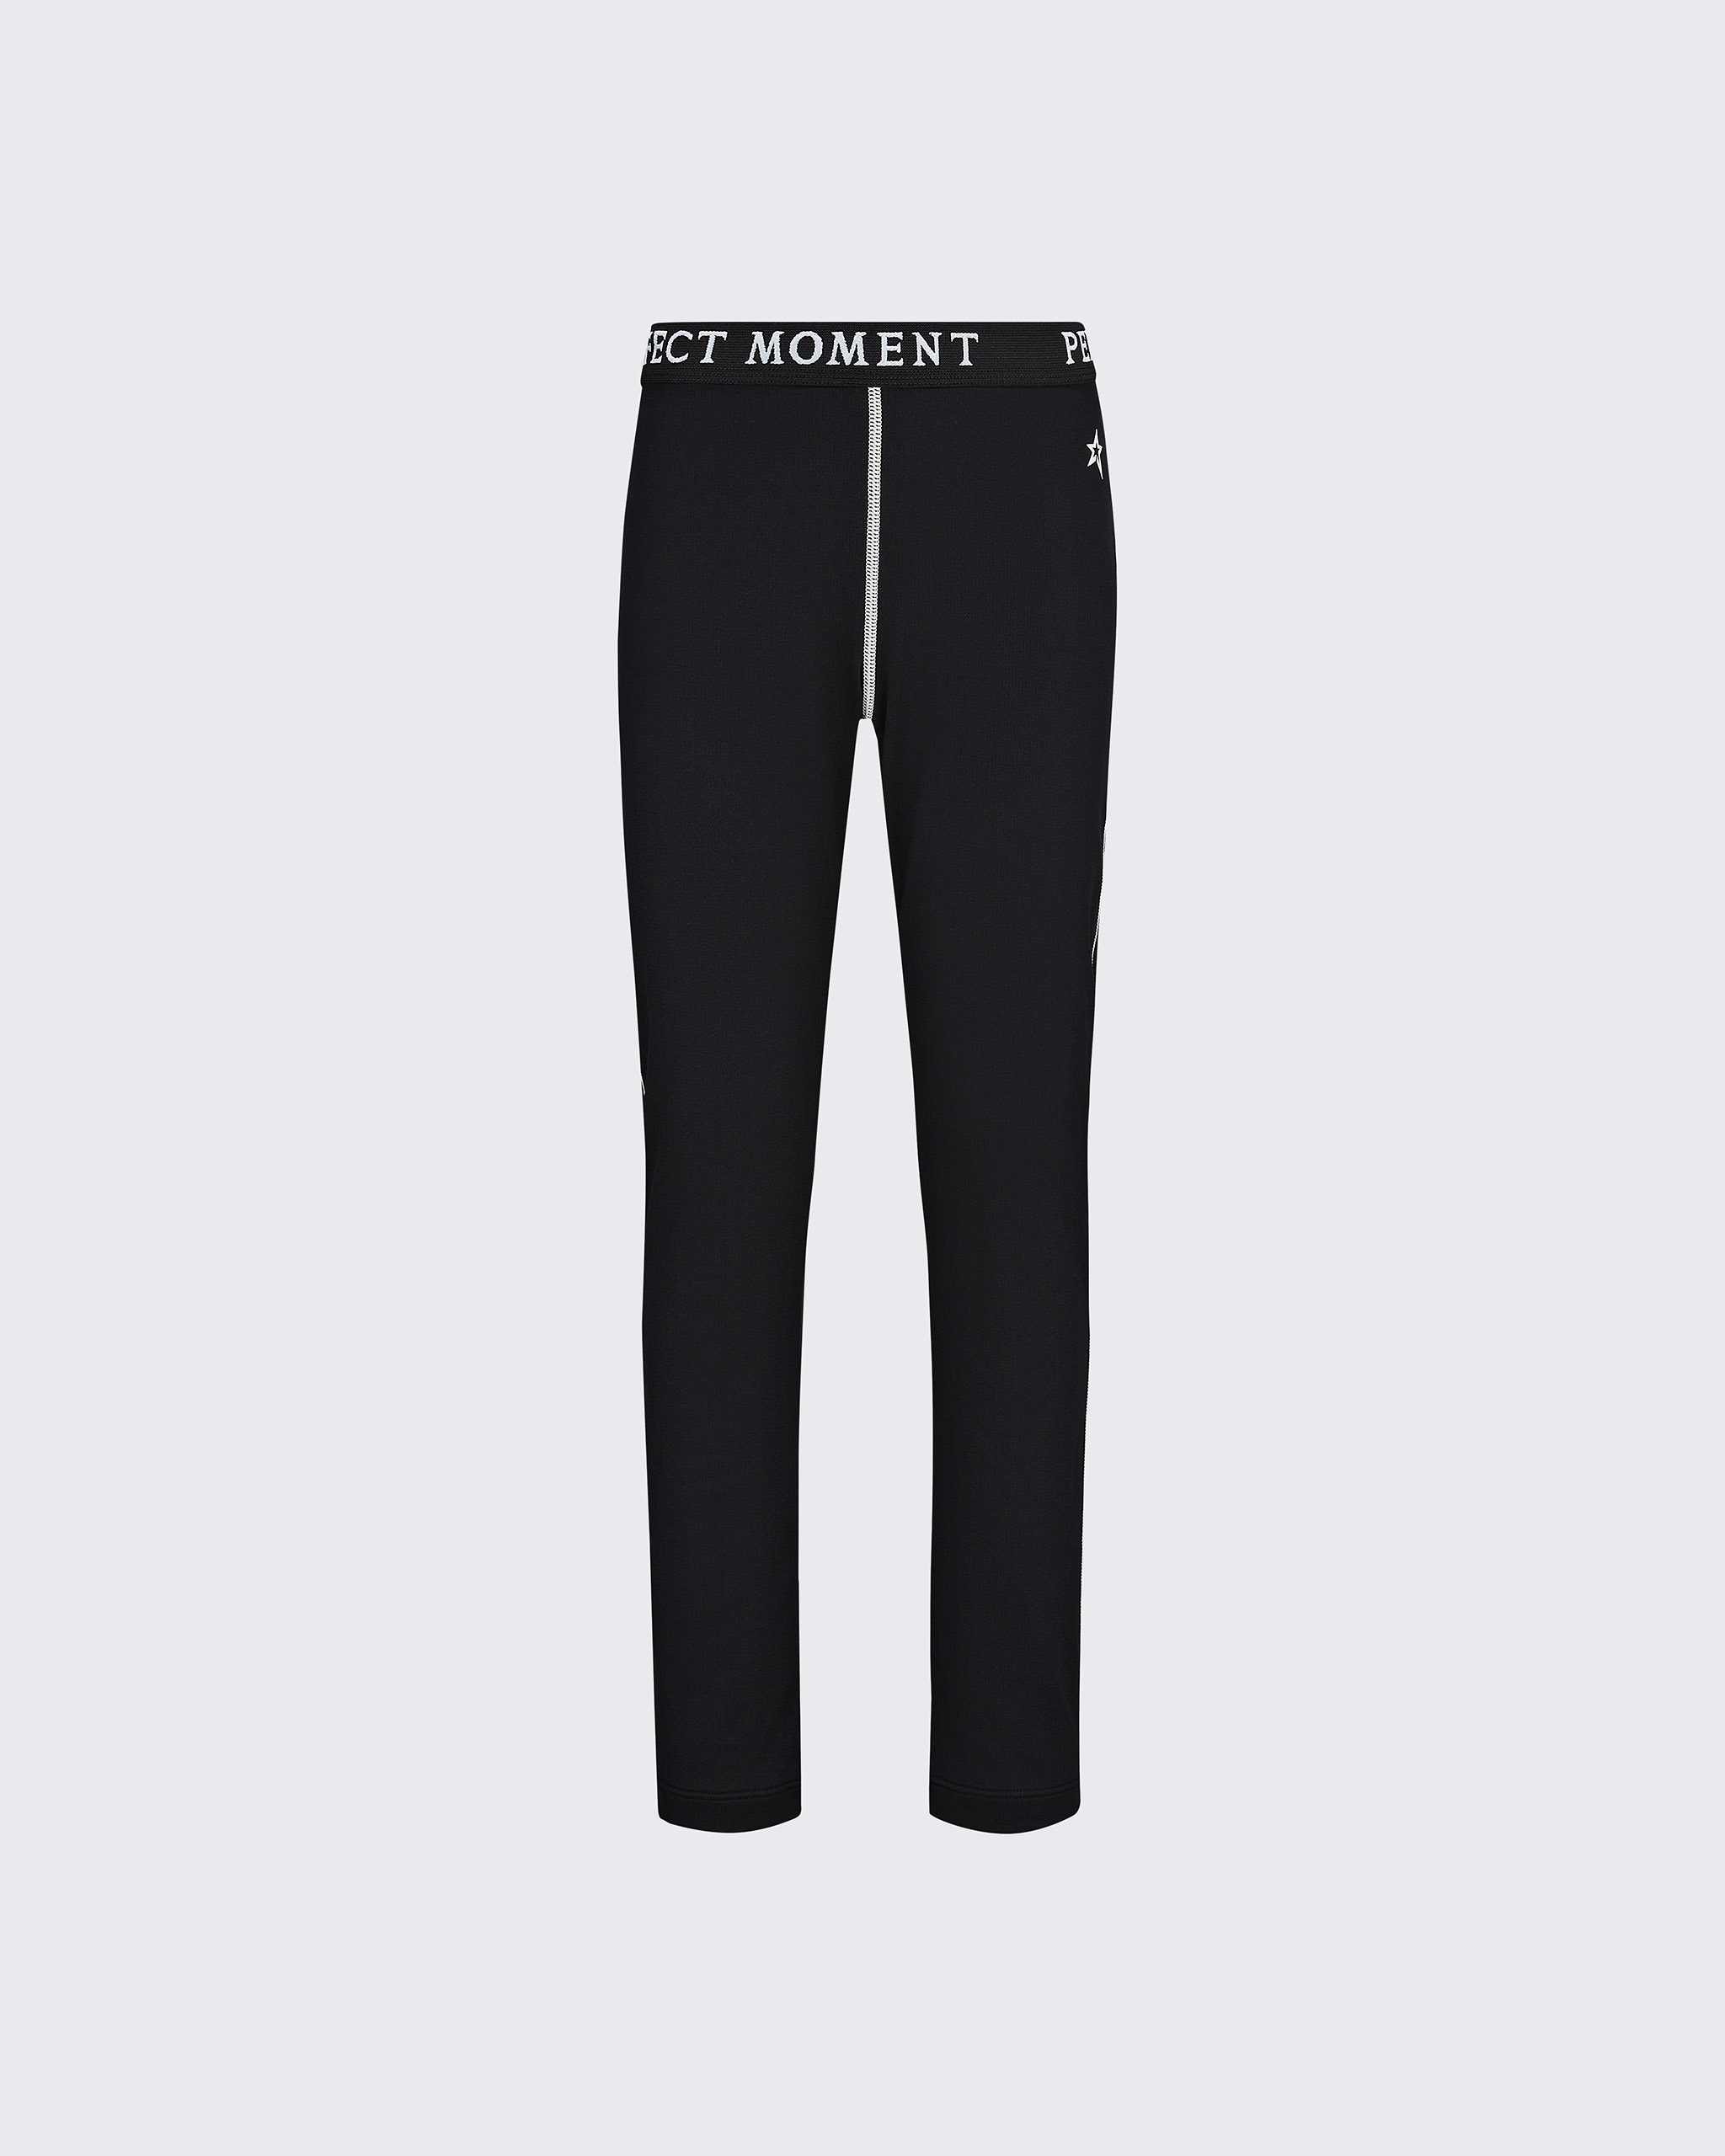 Perfect Moment Thermal Trouser Y14 In Black